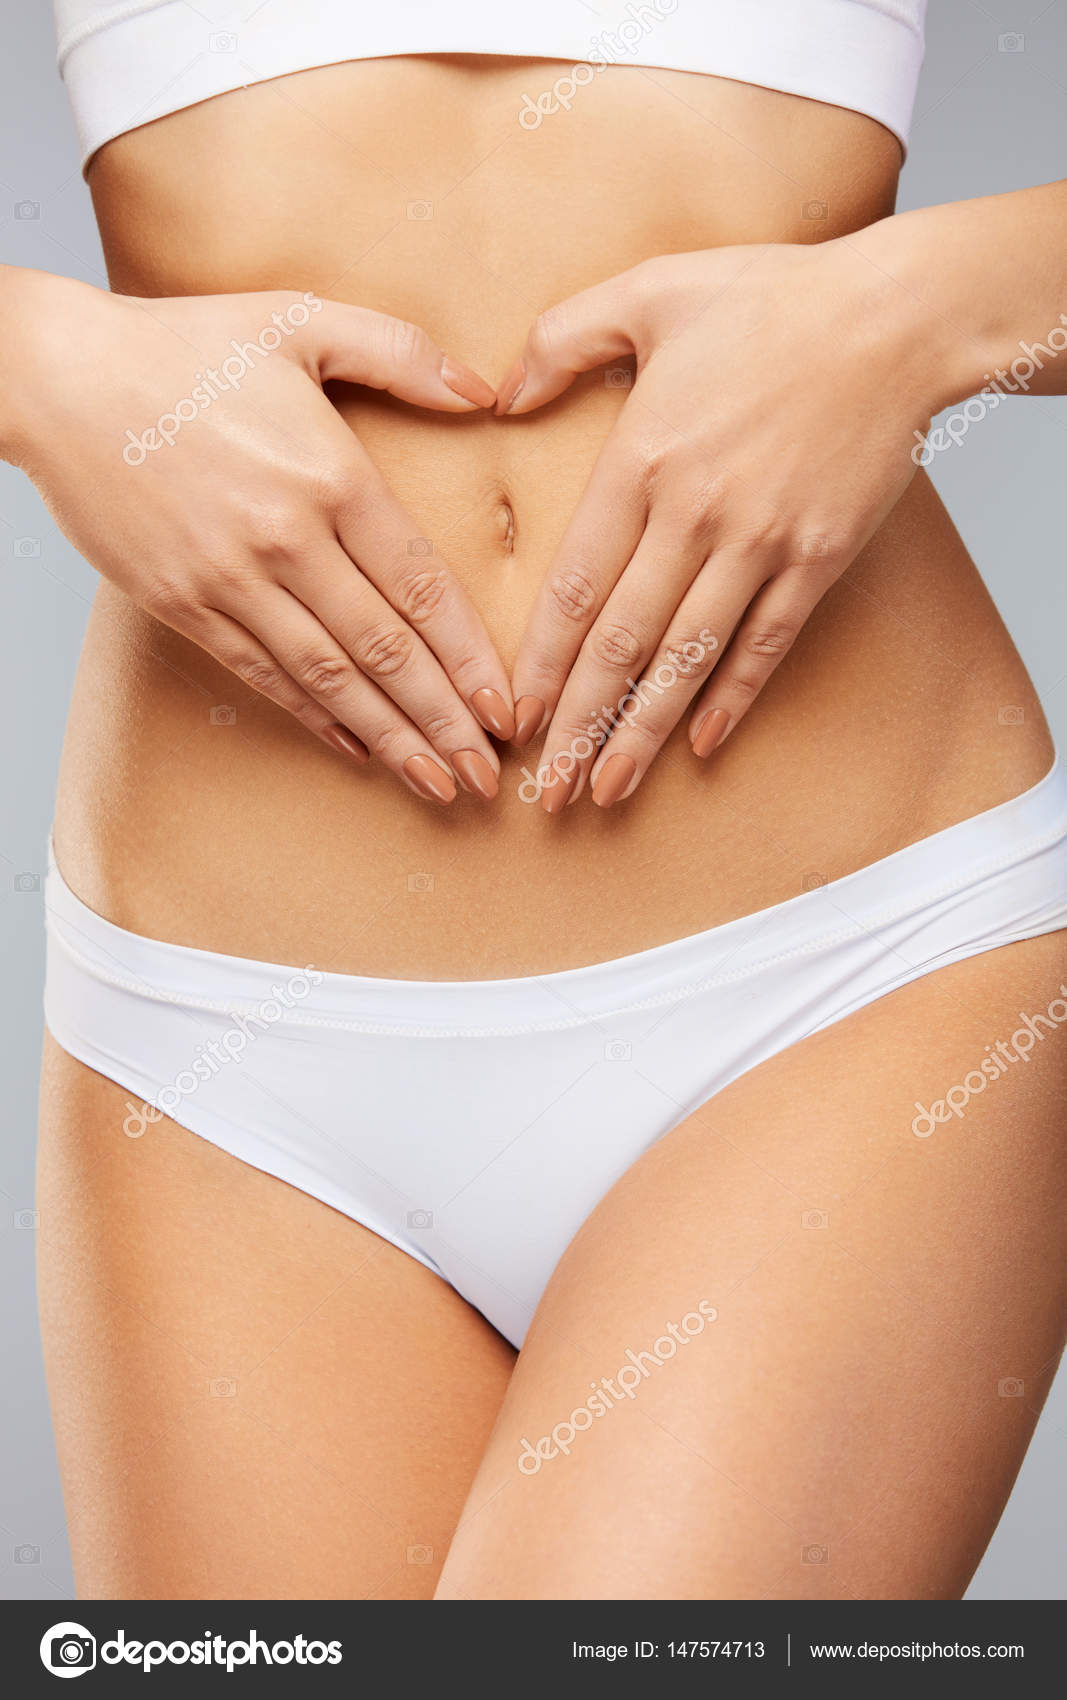 Premium Photo  A woman39s body with folds on the stomach a woman39s hands  hold a saggy stomach high quality photo